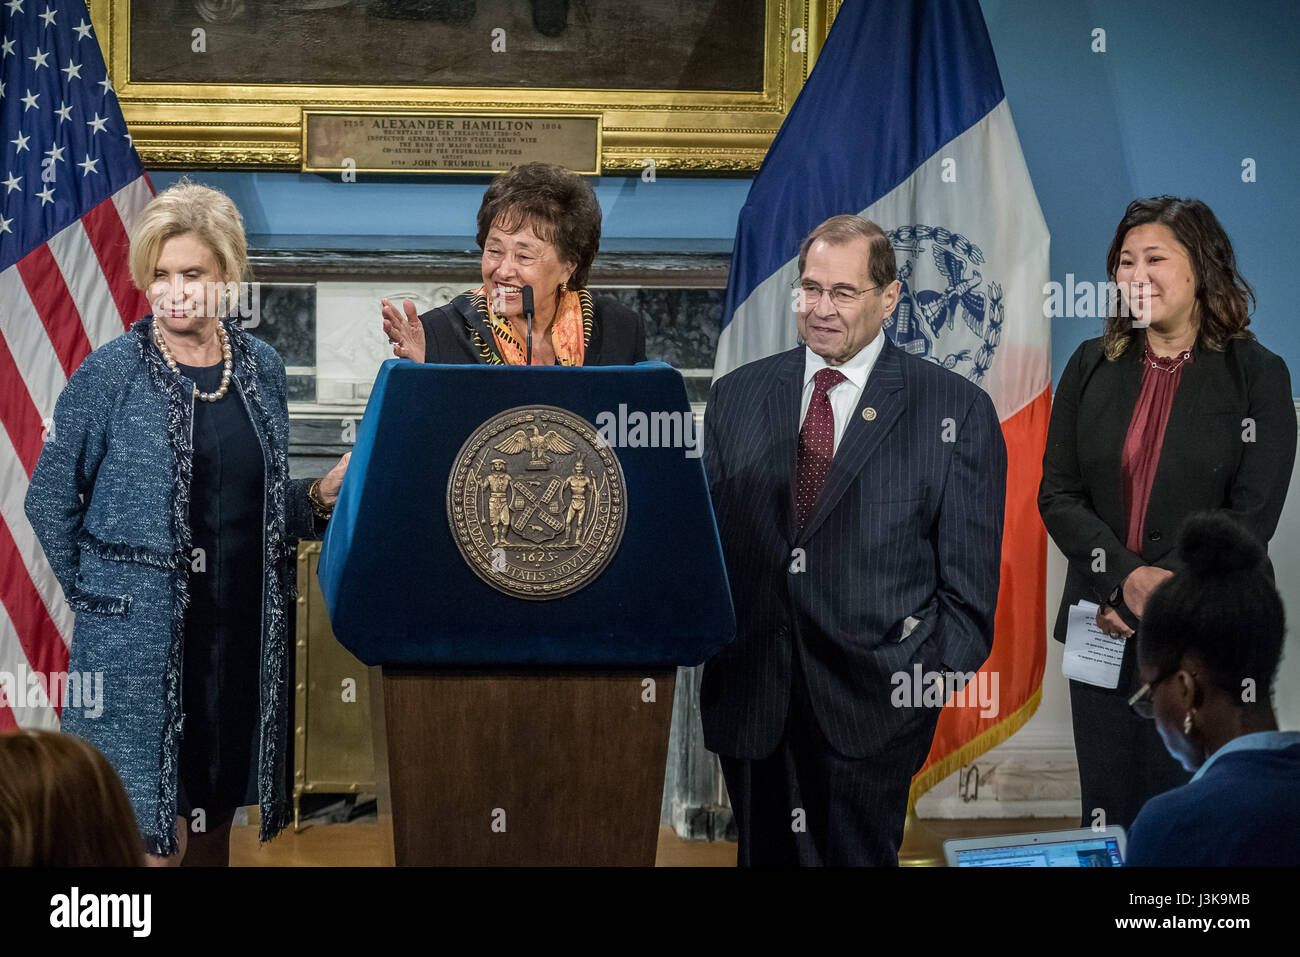 New York, United States. 05th May, 2017. (Left to right): Caroline Maloney, Nita Lowey, Jerry Nadler and Grace Meng are seen during the press conference. New York City Mayor Bill de Blasio, joined by U.S. Congress members representing districts in New York City, held a press conference in the Blue Room at City Hall to announce a federal budget deal allowing for $68 million of reimbursements by the federal government for the City's expenses in protecting Trump Tower and the Presidential First Family. Credit: Albin Lohr-Jones/Pacific Press/Alamy Live News Stock Photo